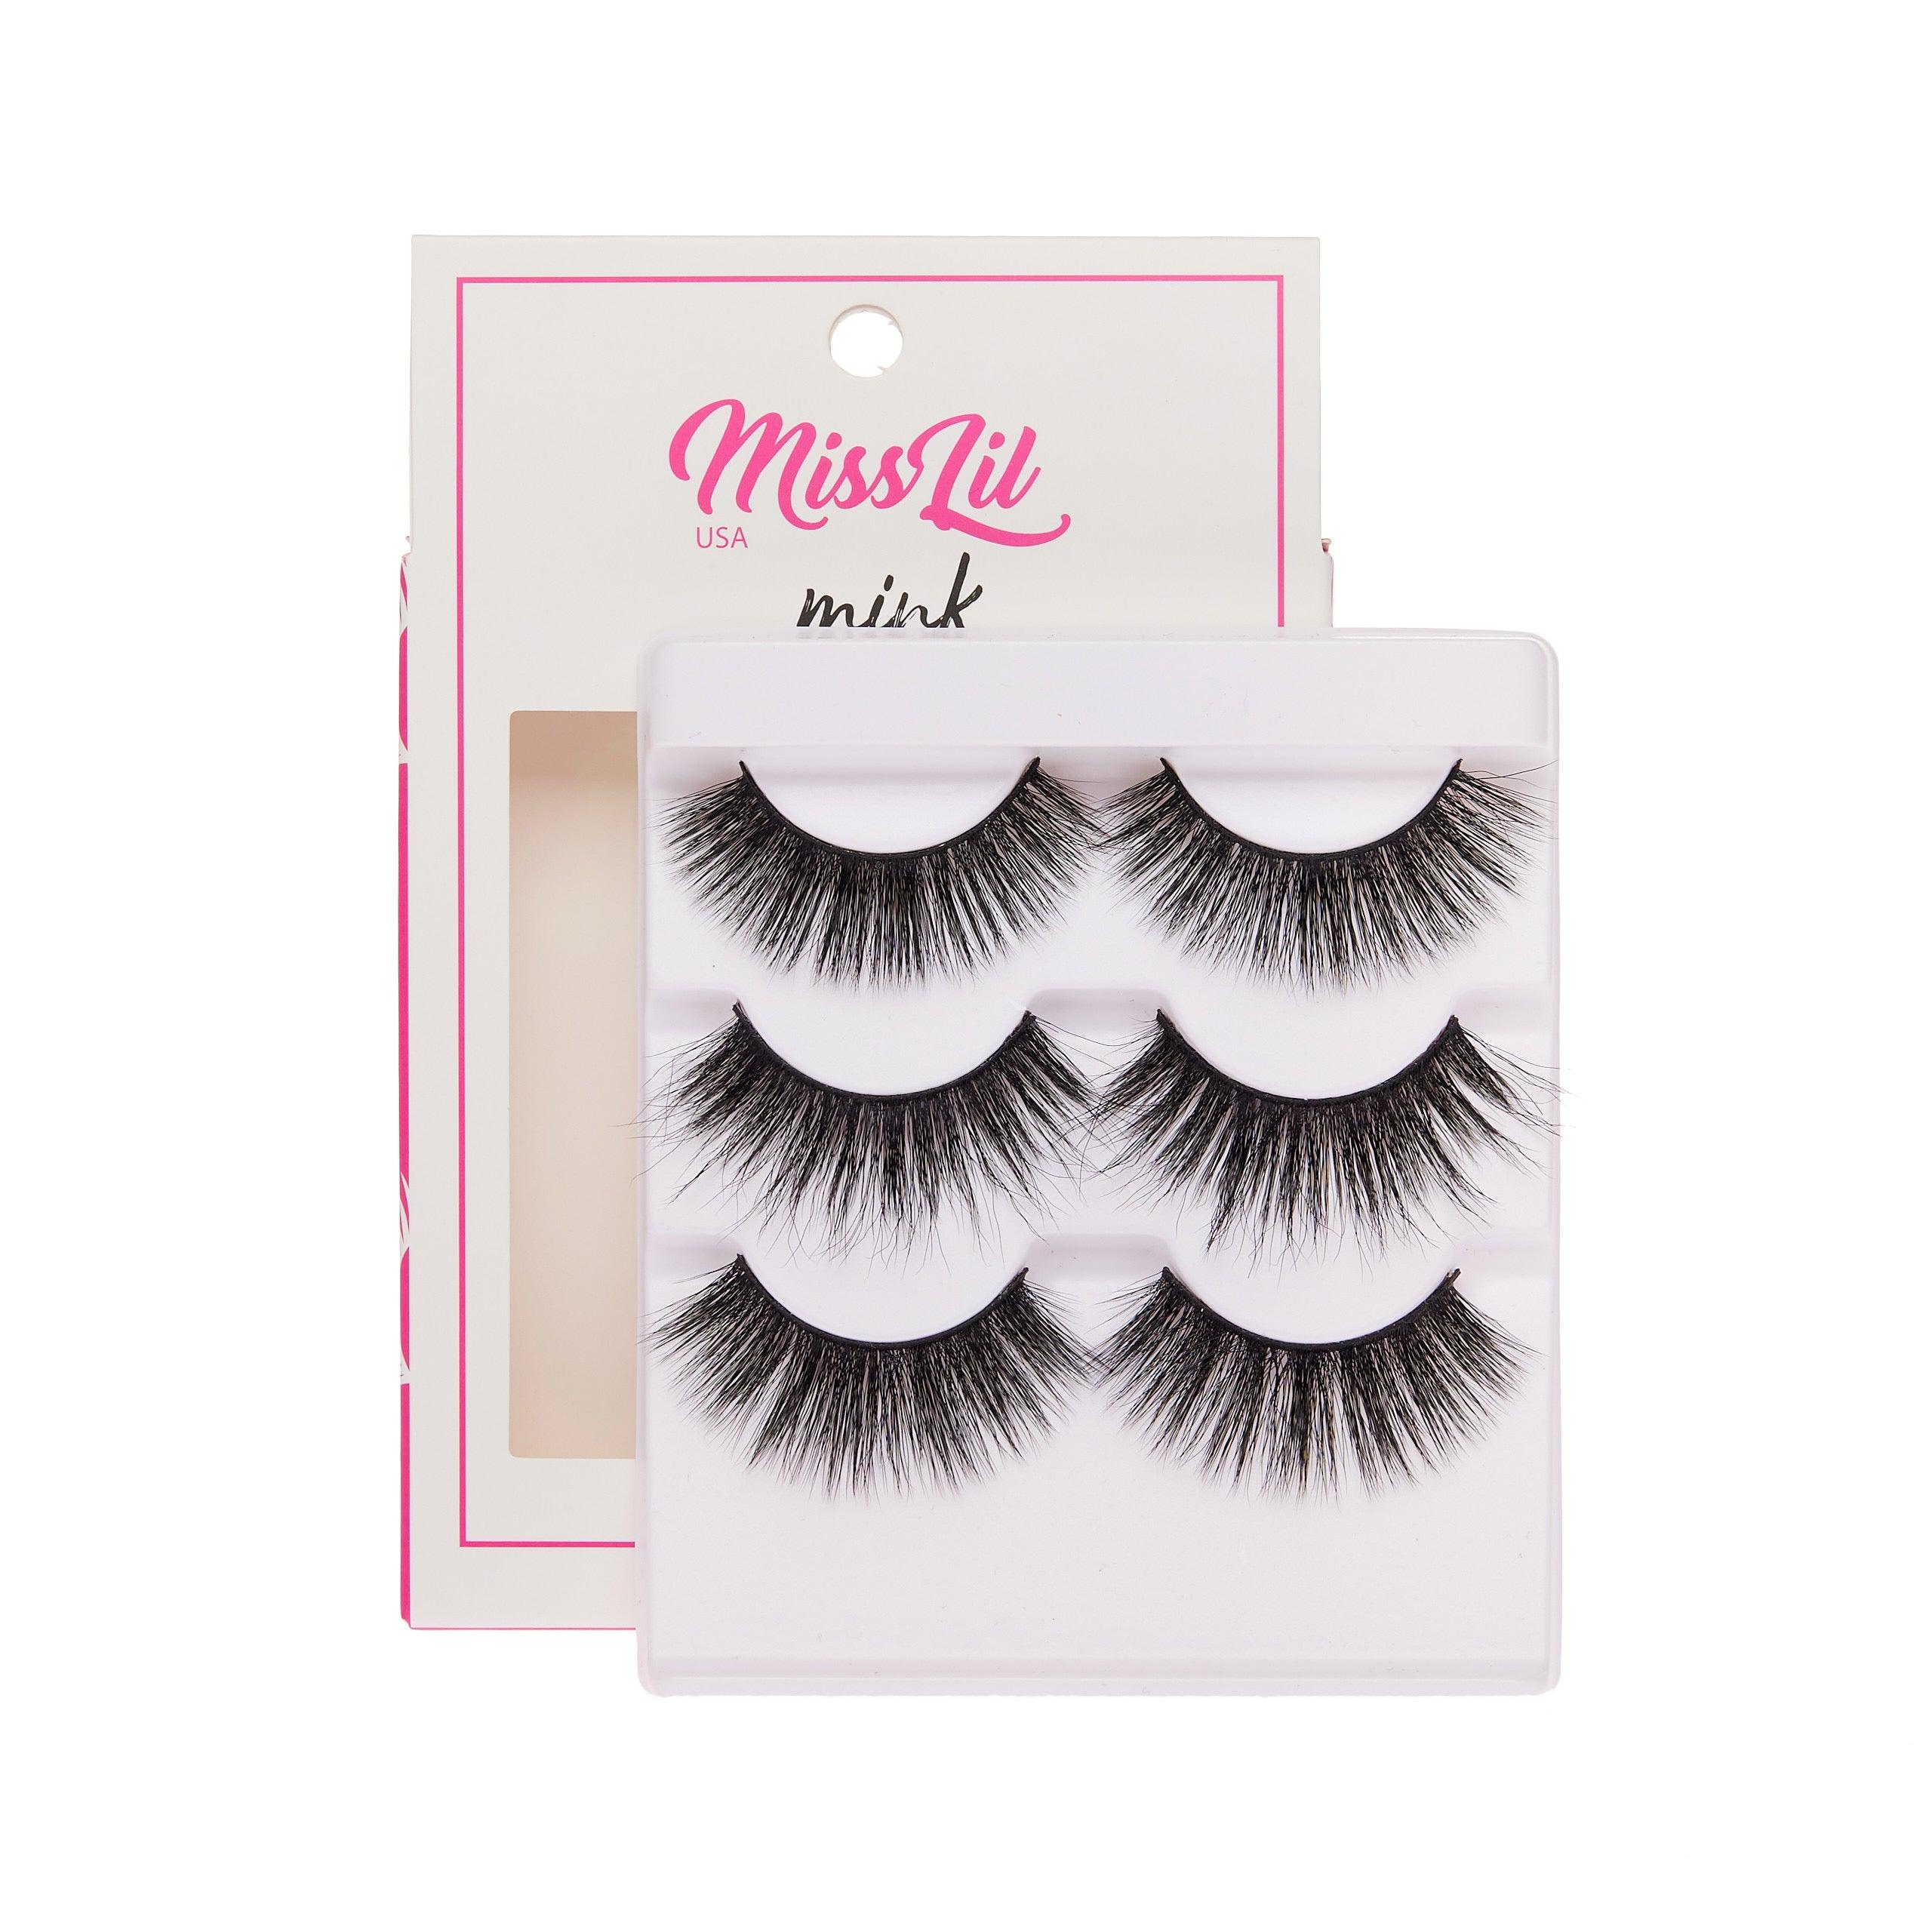 3-Pair Faux Mink Effect Eyelashes - Lash Party Collection #12 - Pack of 12 - Miss Lil USA